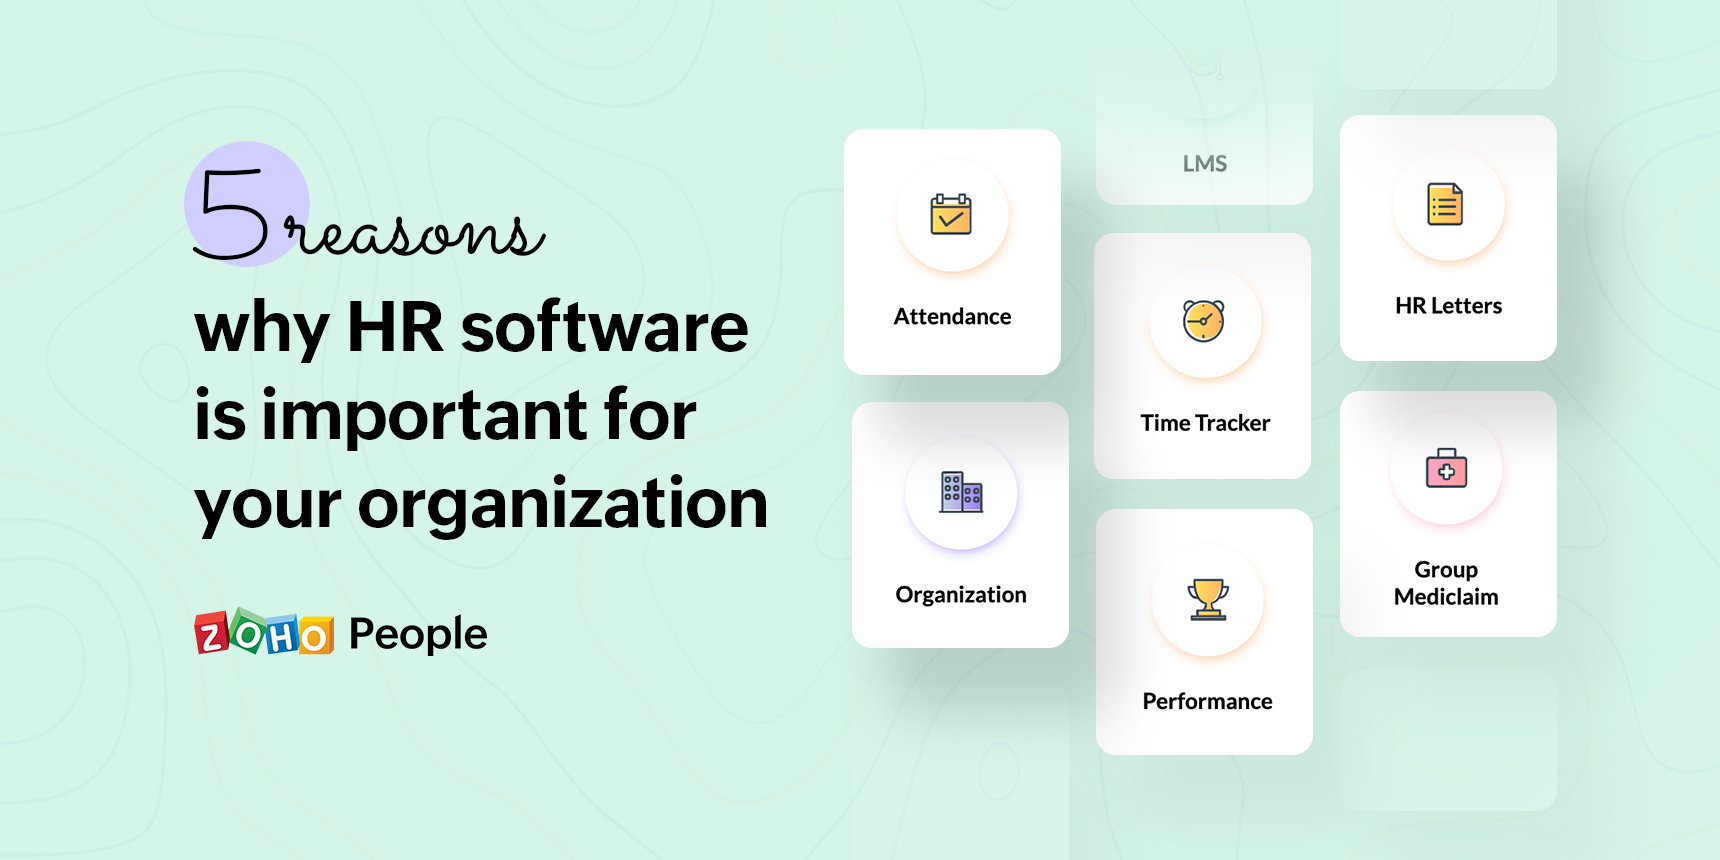 Here's why HR software is important for your organization